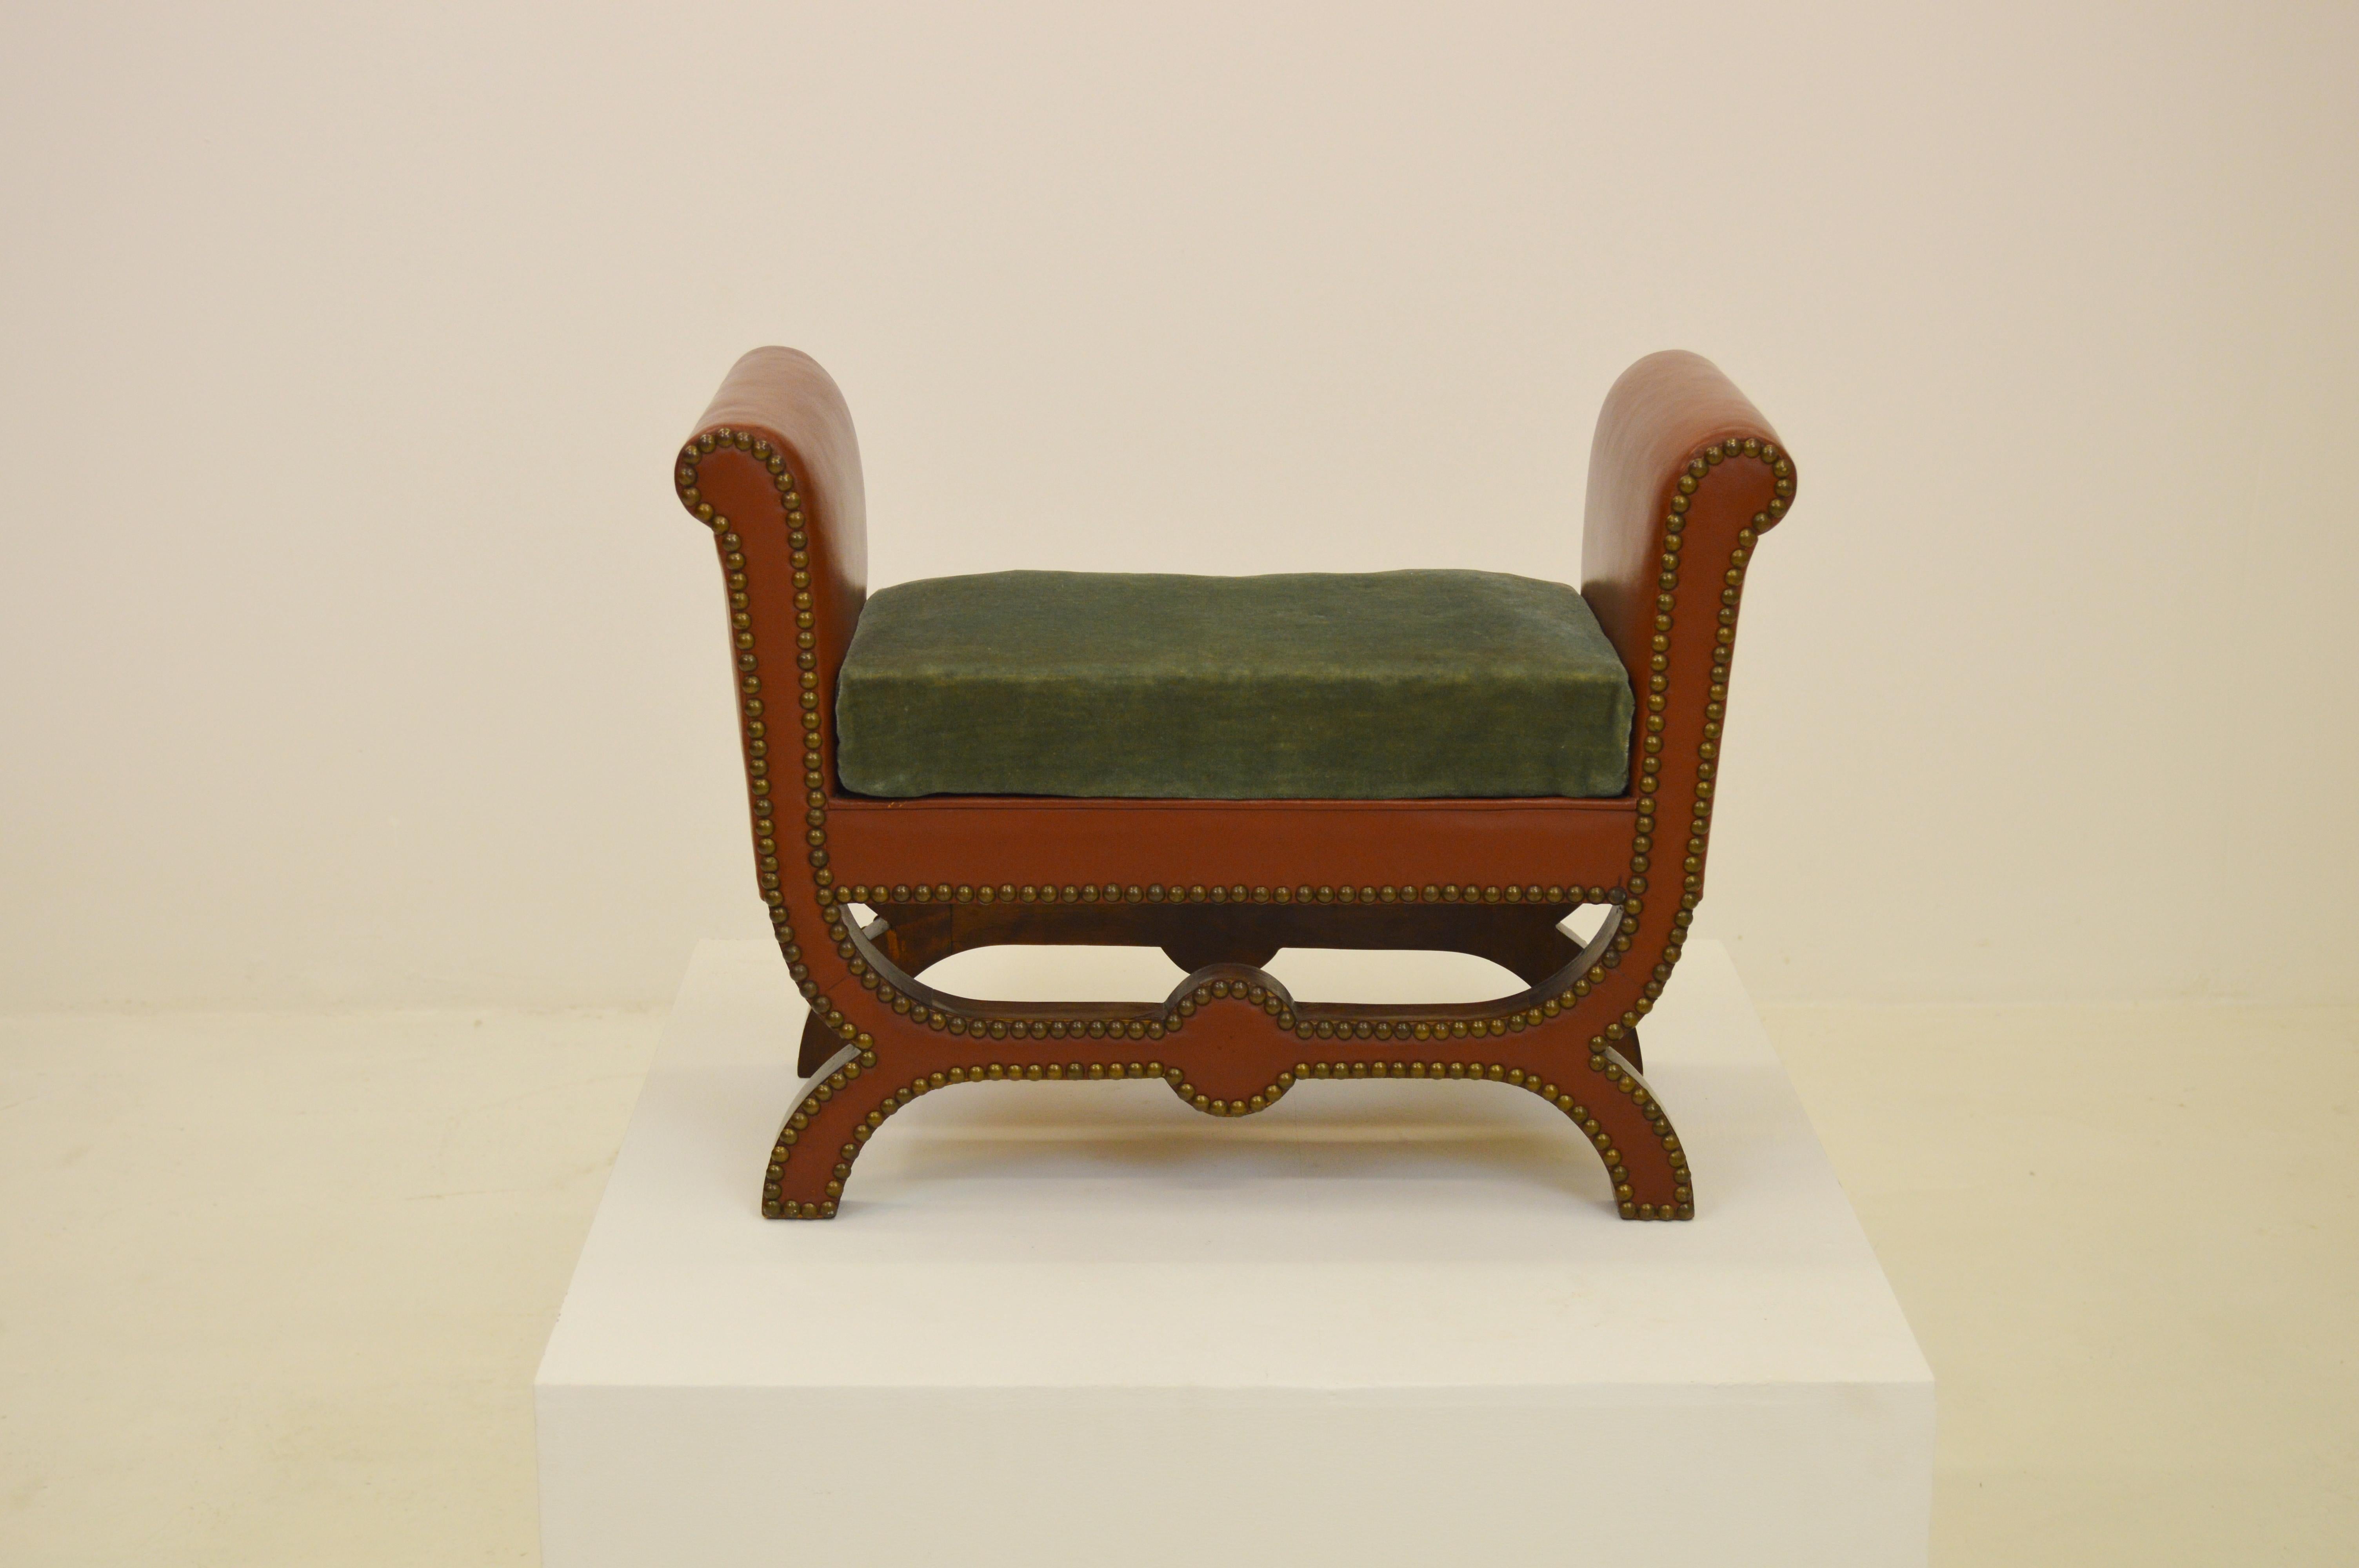 Foot stool or bench designed by Otto Schulz for Boet in Sweden,
circa 1930s, Scandinavian modern design.
Leather and fabric with brass nail heads.